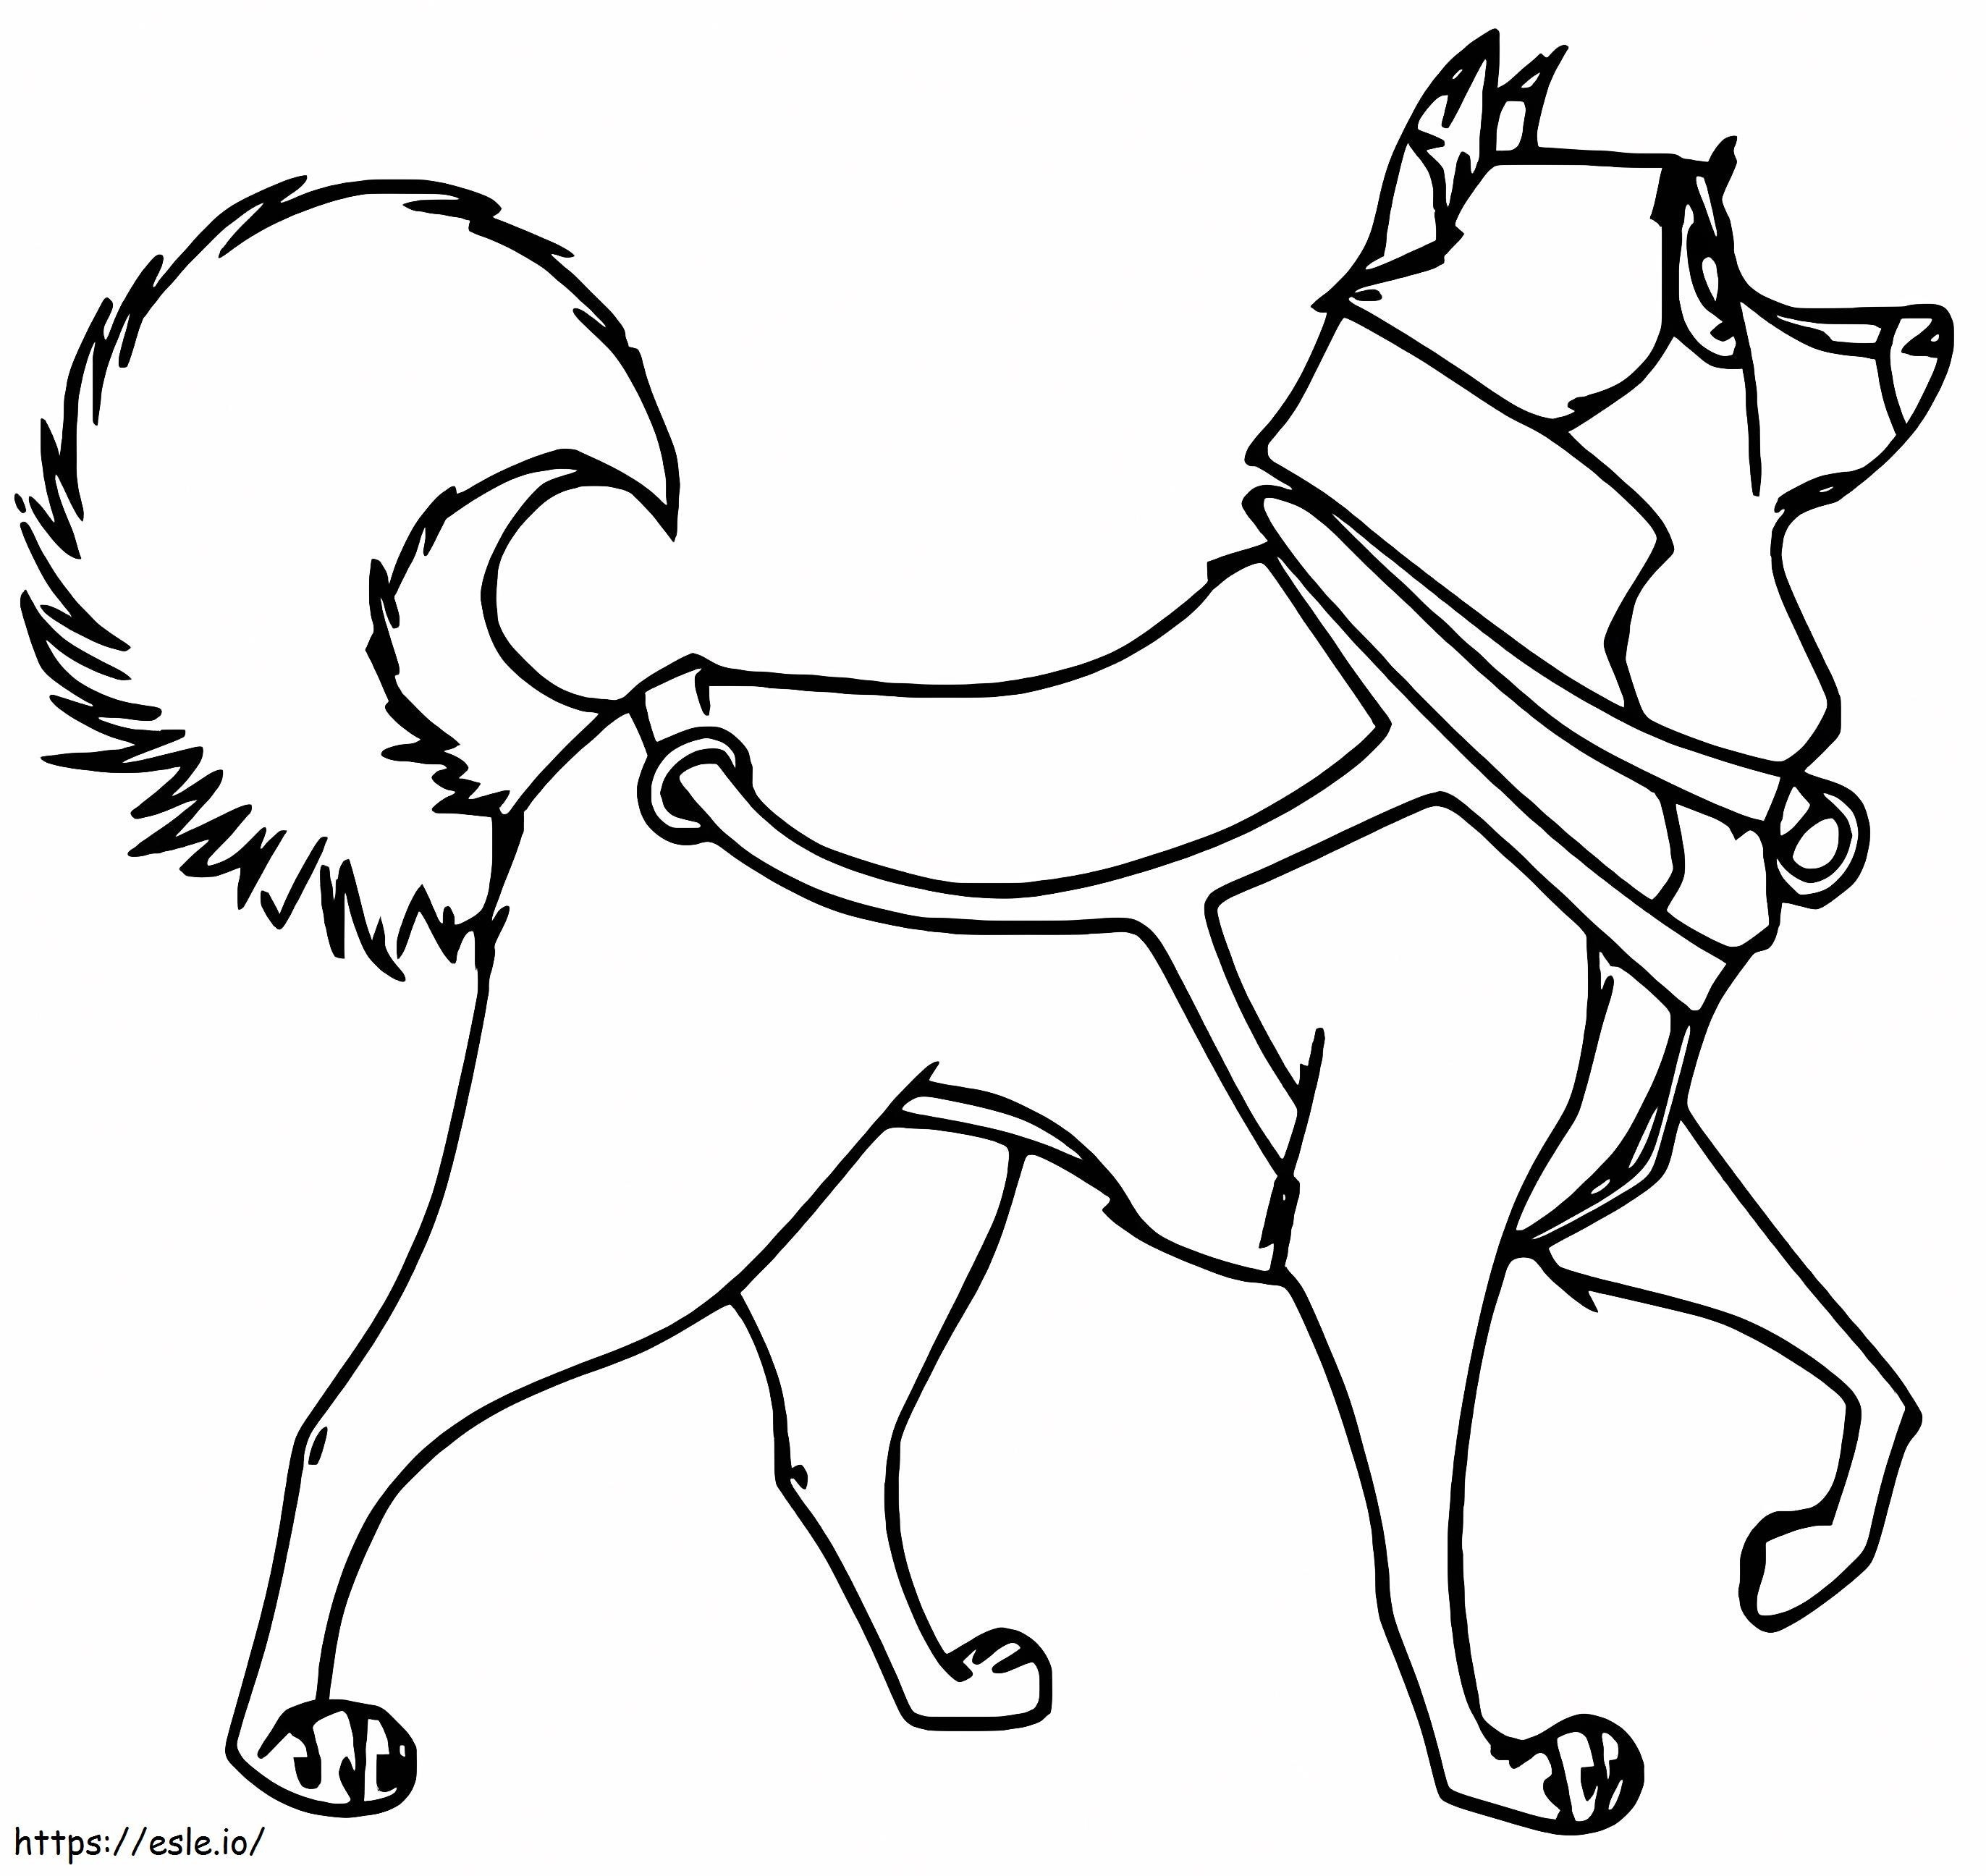 Steele From Balto coloring page